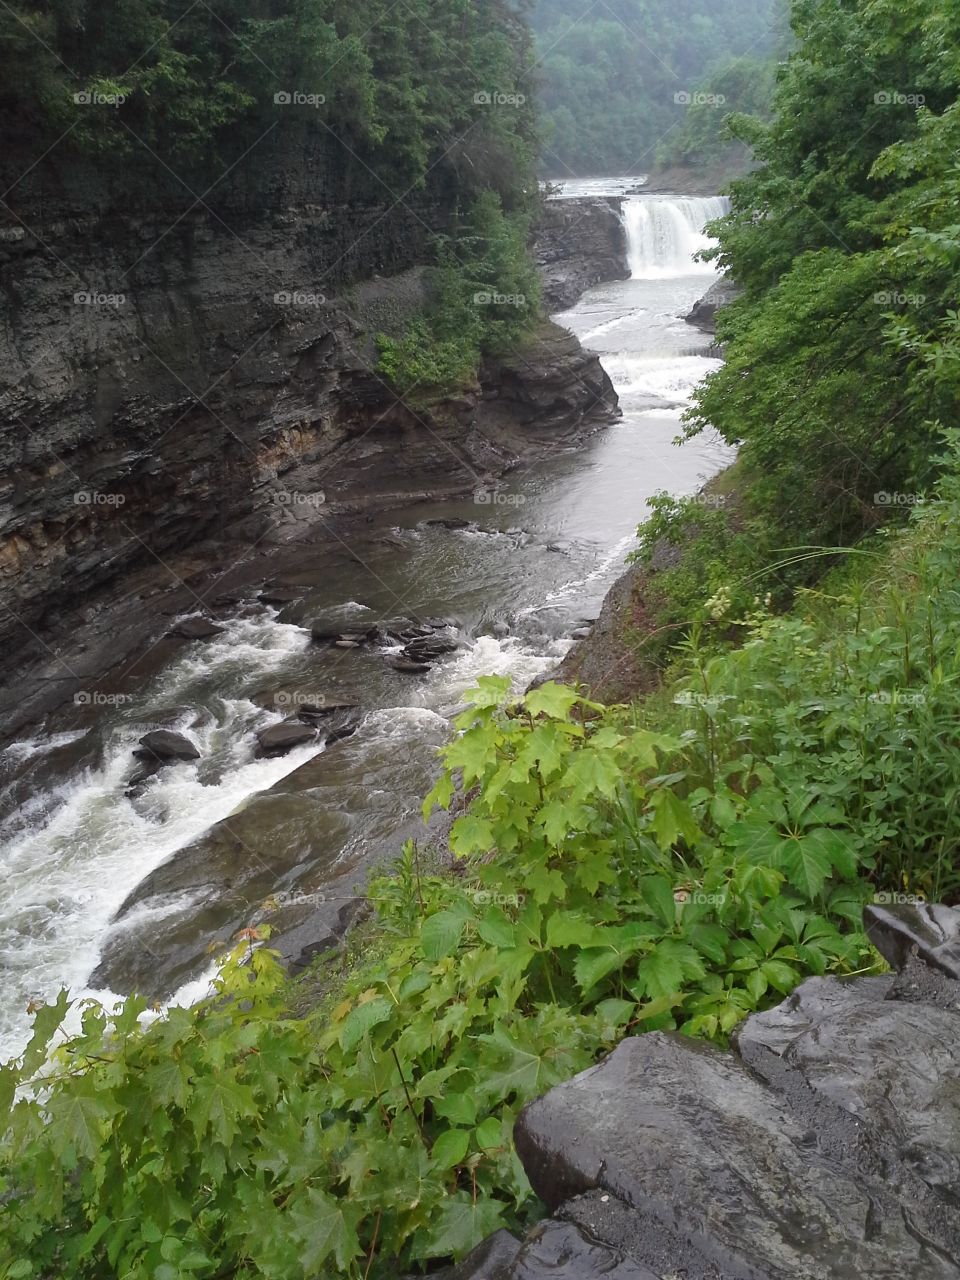 View of the Lower Falls Down River at Letchworth State Park